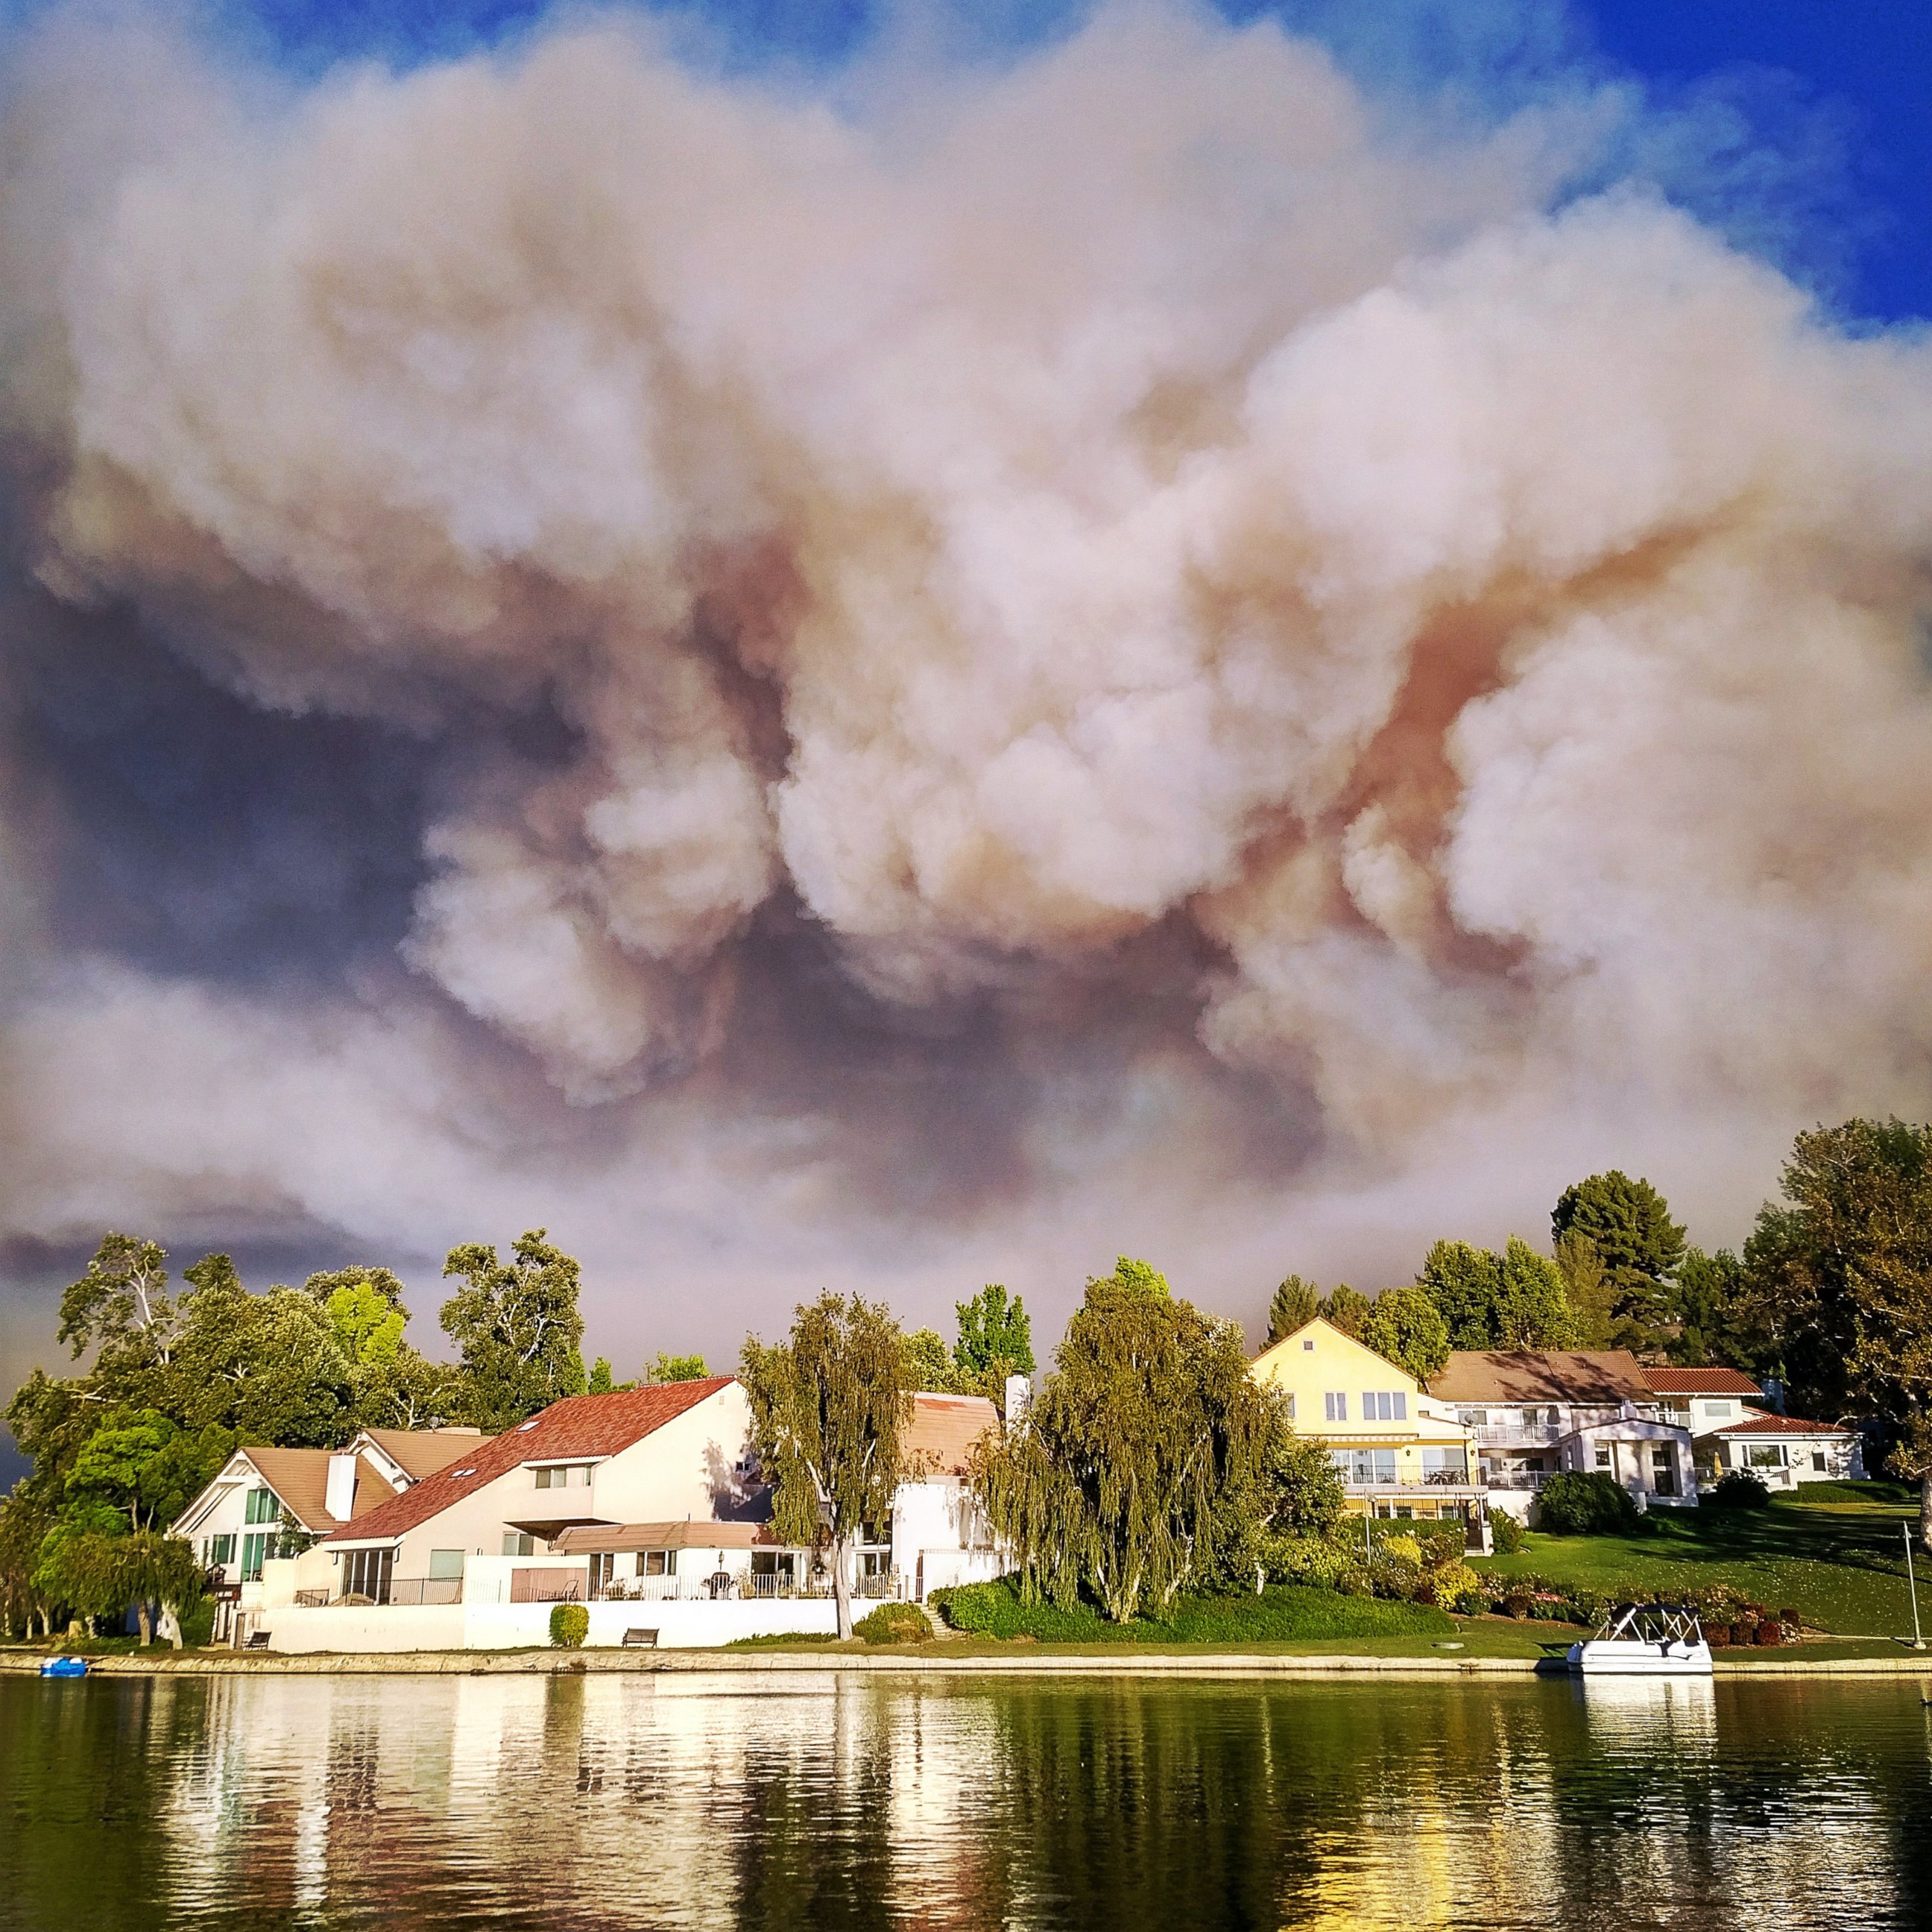 PHOTO: This photo provided by Matthew Dangerfield shows billowing smoke from the fire in Calabasas, Calif., as the clouds passed over the homes of Park Calabasas, June 4, 2016. 